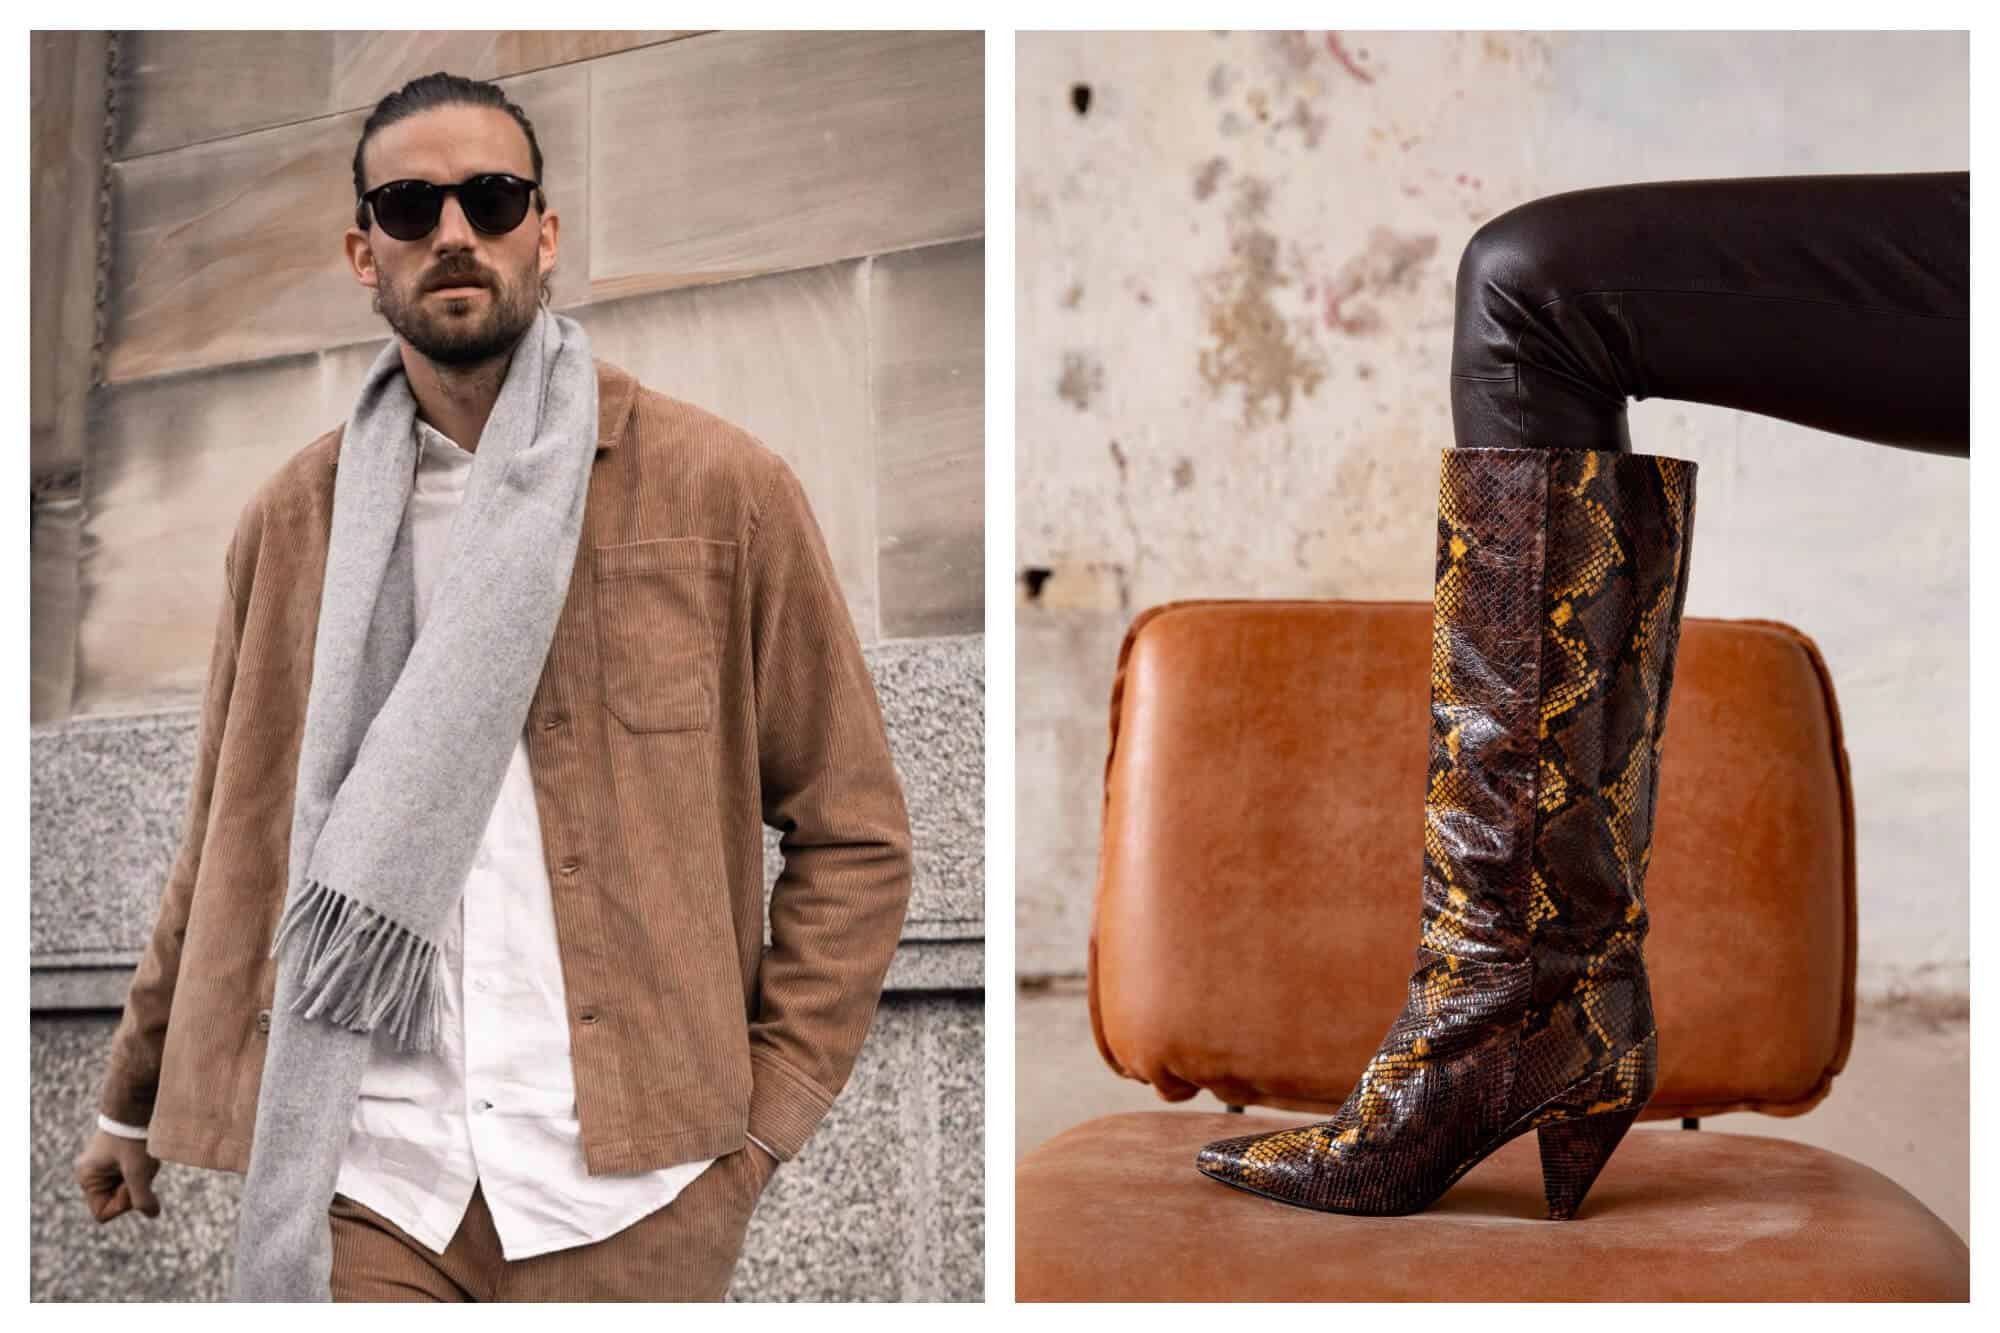 Left: a man in front of a stone wall wearing a camel coloured jacket and matching pants, a white shirt, a grey scarf and sunglasses. Right: a woman's leg positioned on a tan leather chair. She's wearing black pants with brown snakeskin heeled boots.